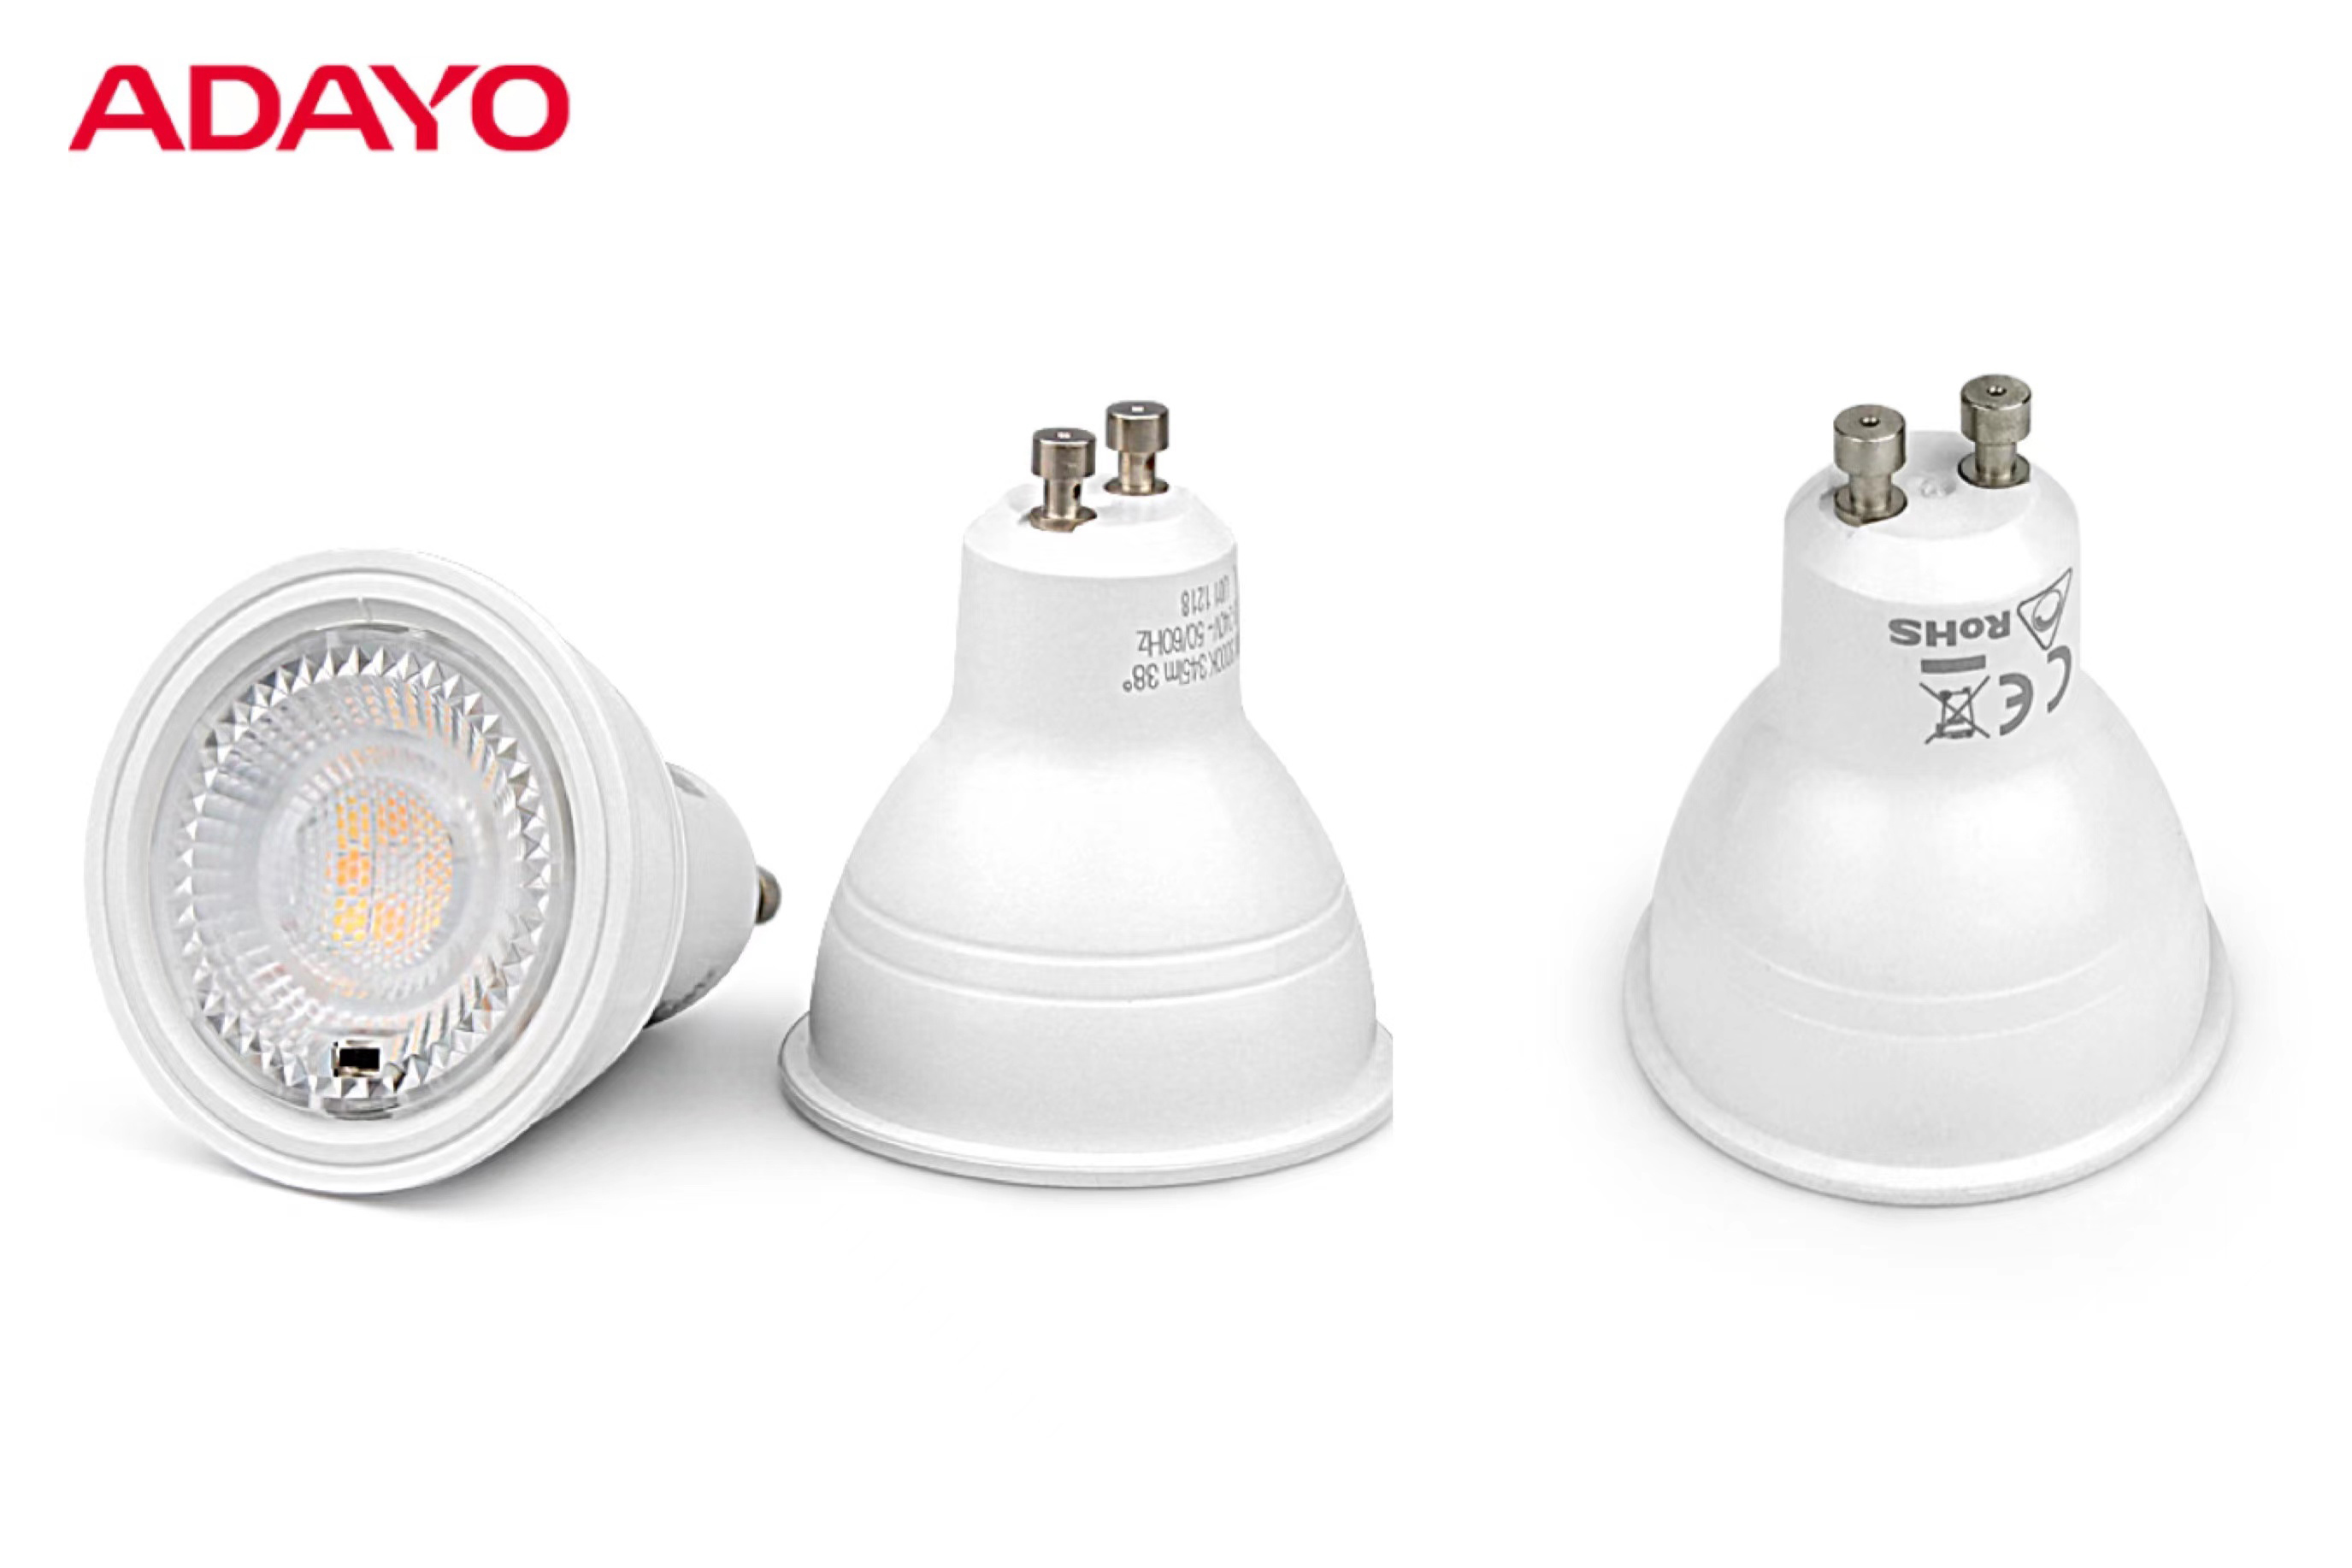 ADAYO dimmable downlights